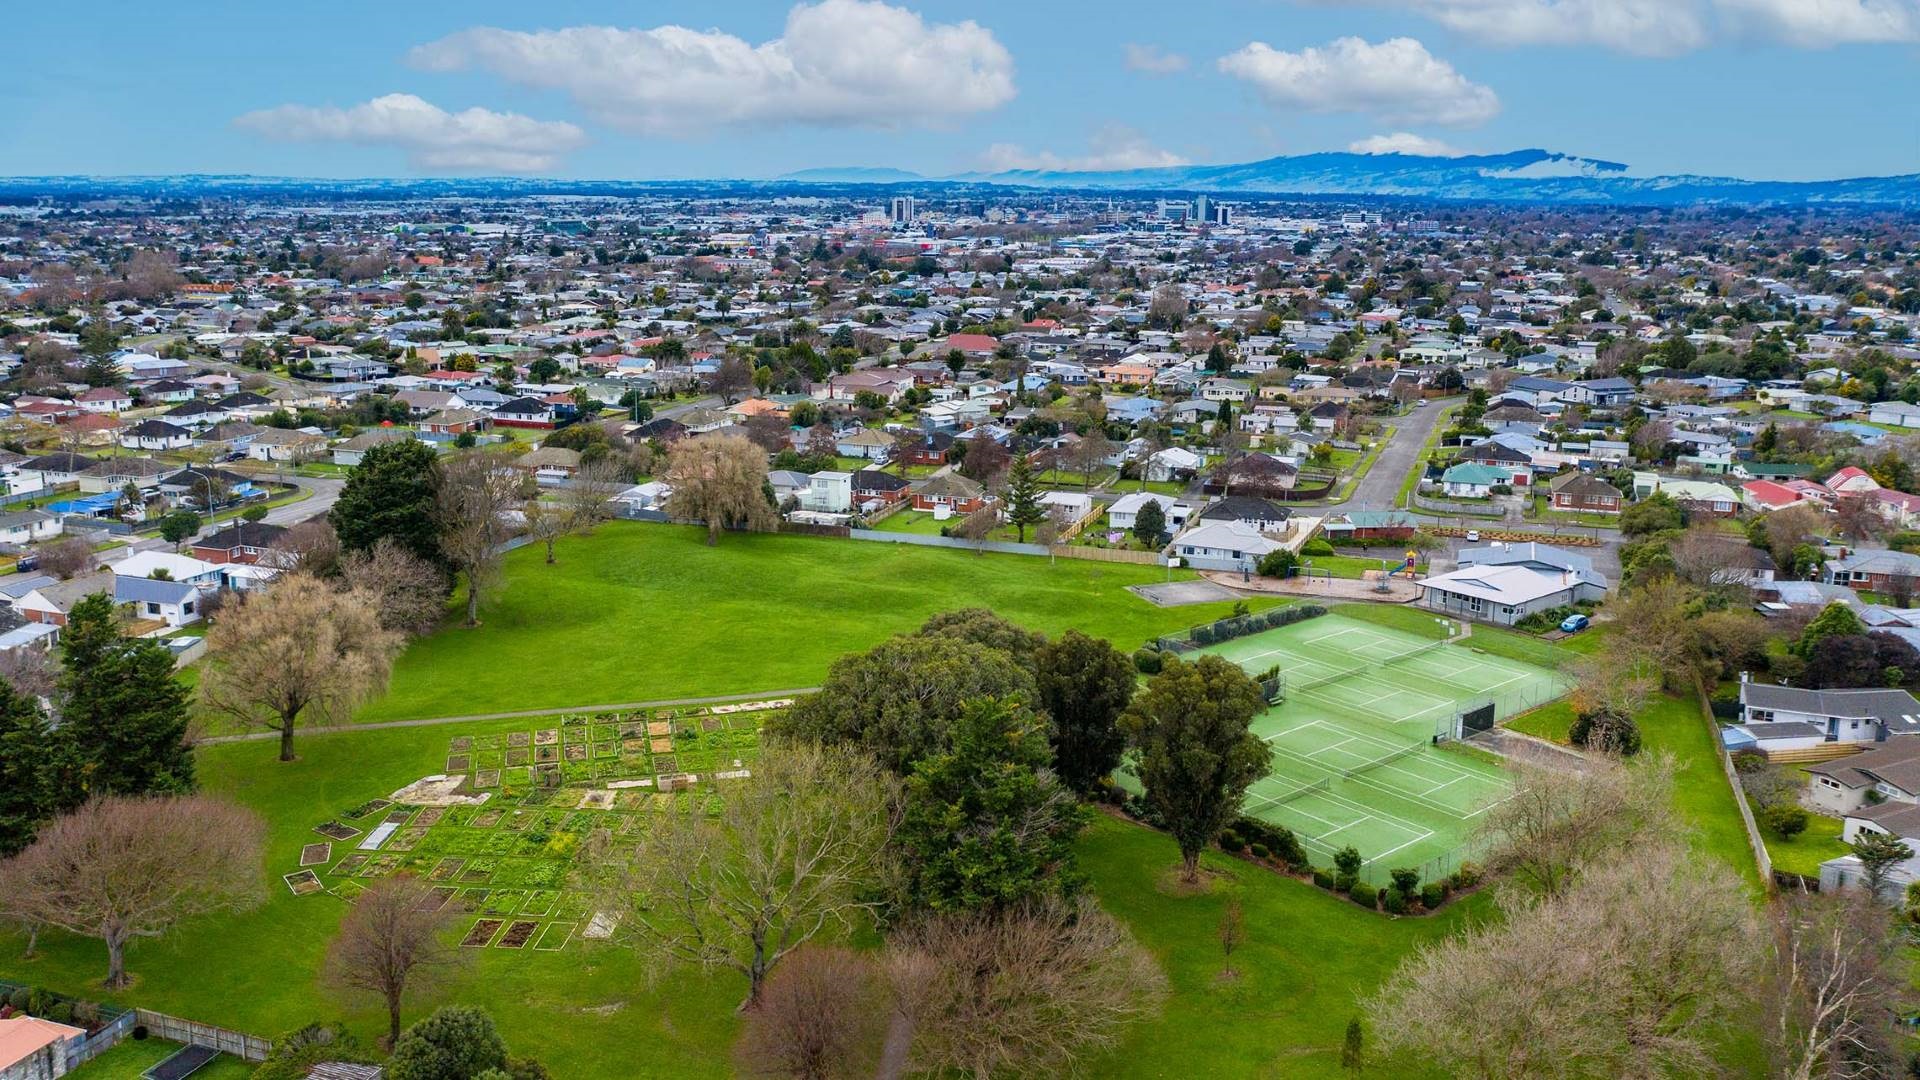 Photo shows aerial view of a grassy park with some established shade trees around the perimeter, a number of lawn tennis courts, and the community gardens. Neighbouring houses stretch into the background.